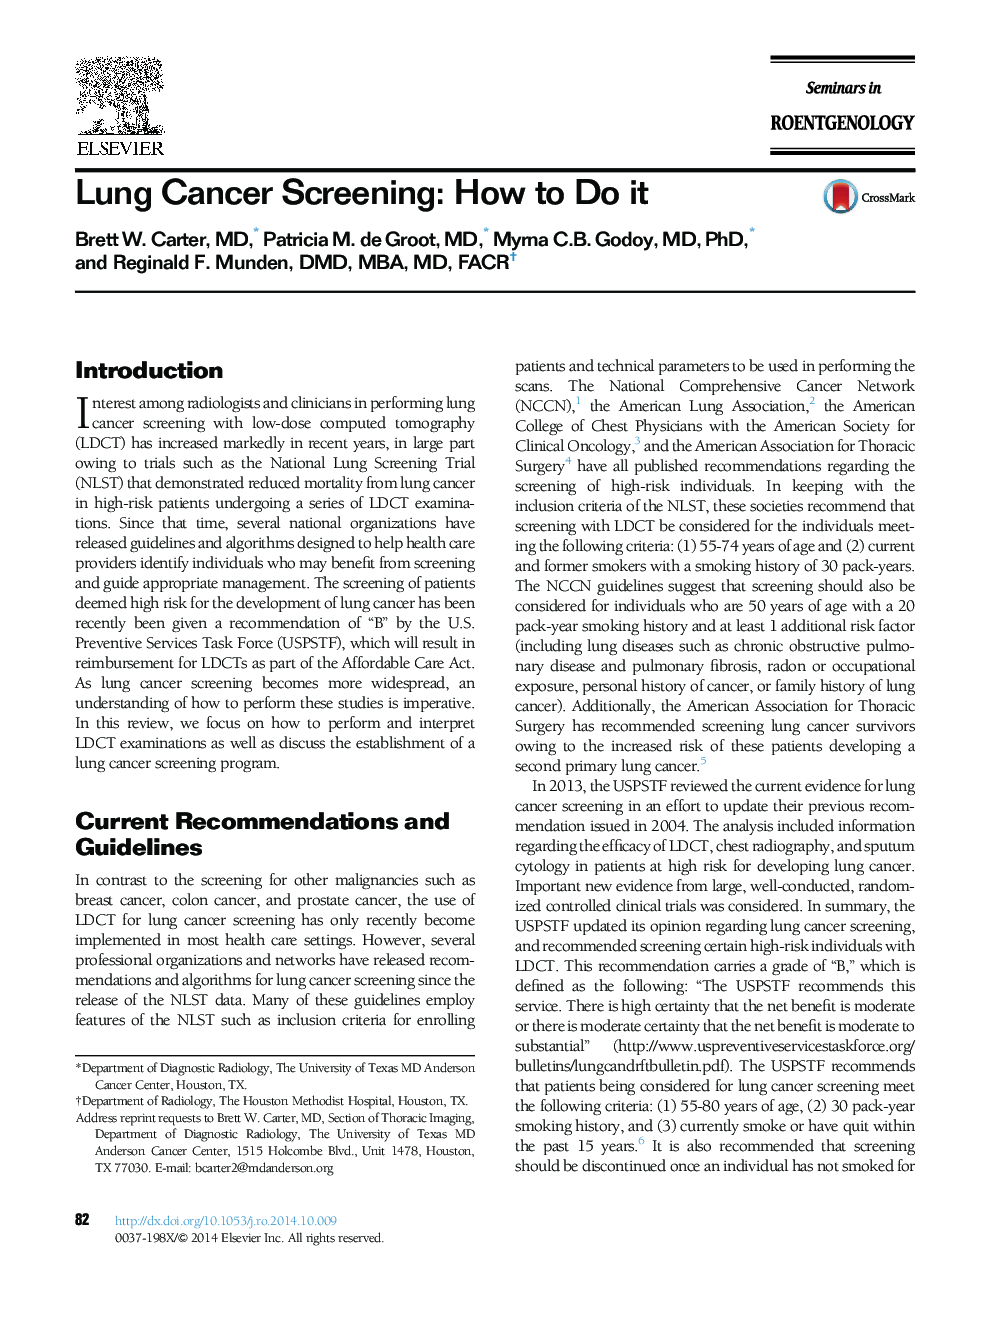 Lung Cancer Screening: How to Do it